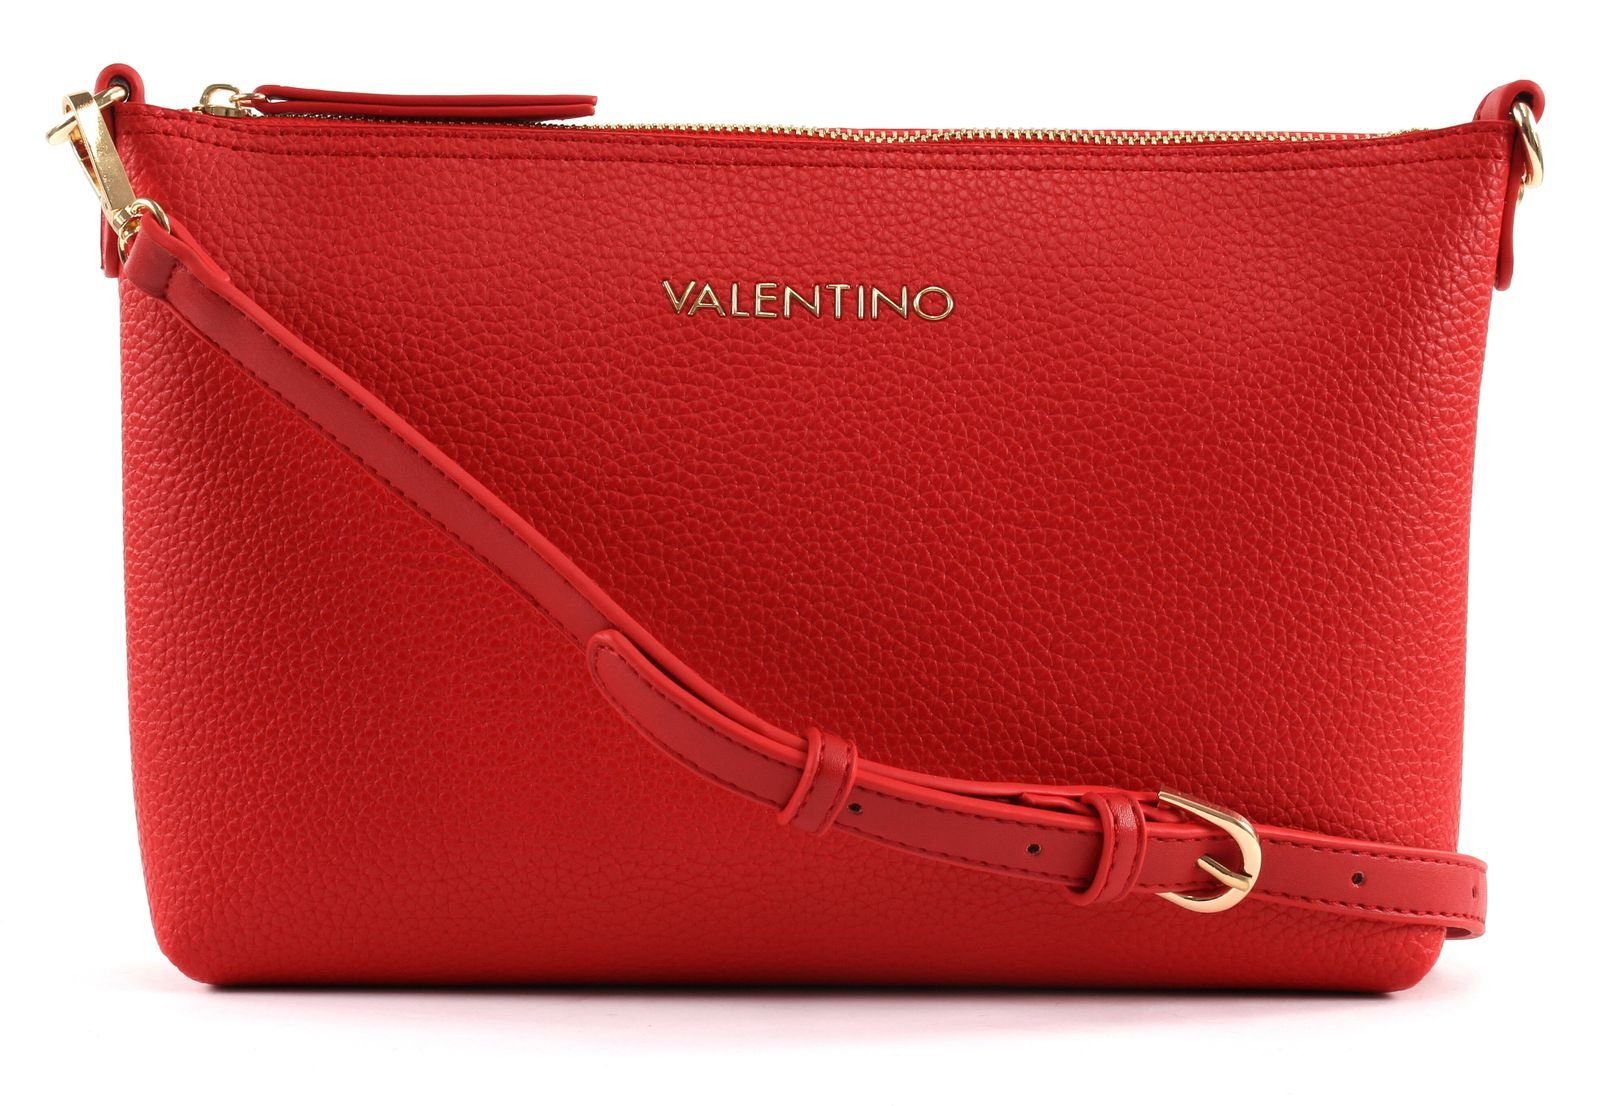 VALENTINO BAGS Rosso Superman Clutch